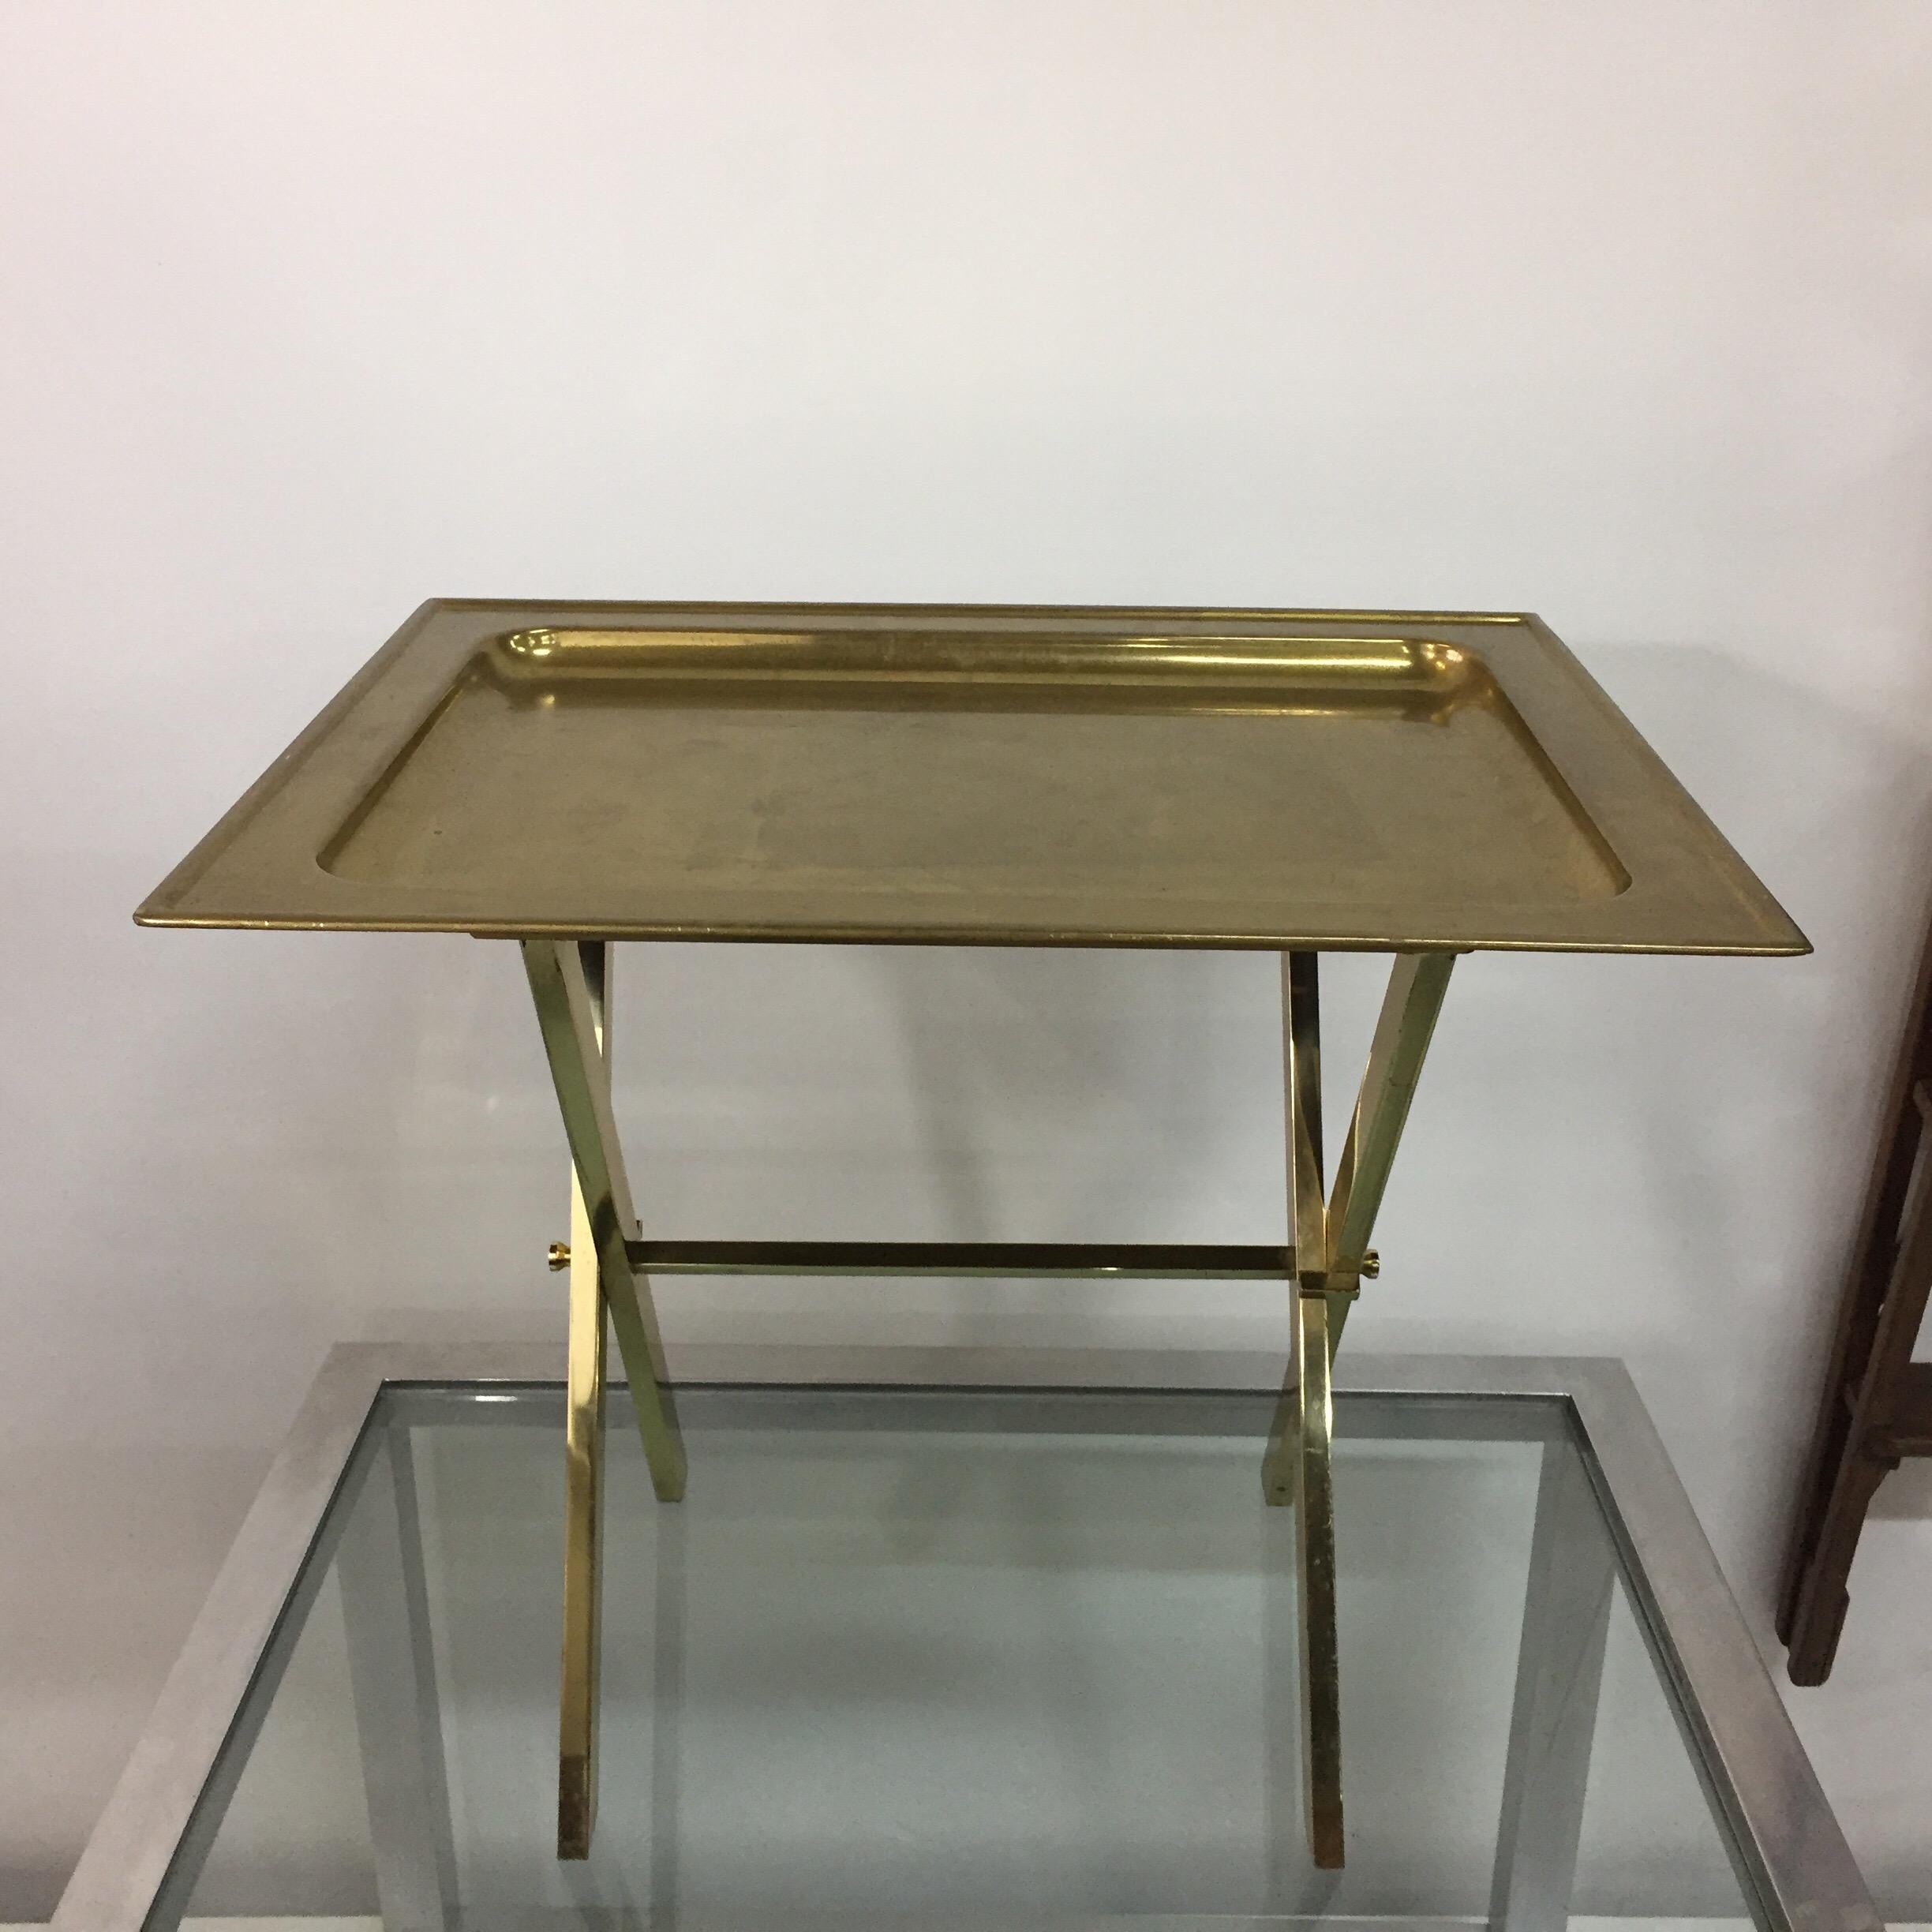 This all brass tray table and folding base in the style of Jansen from the 1970s was found in Italy. Great entertaining table or as a side table, easy to store if not needed. This item shows the appropriate age and patina from years of loving use.